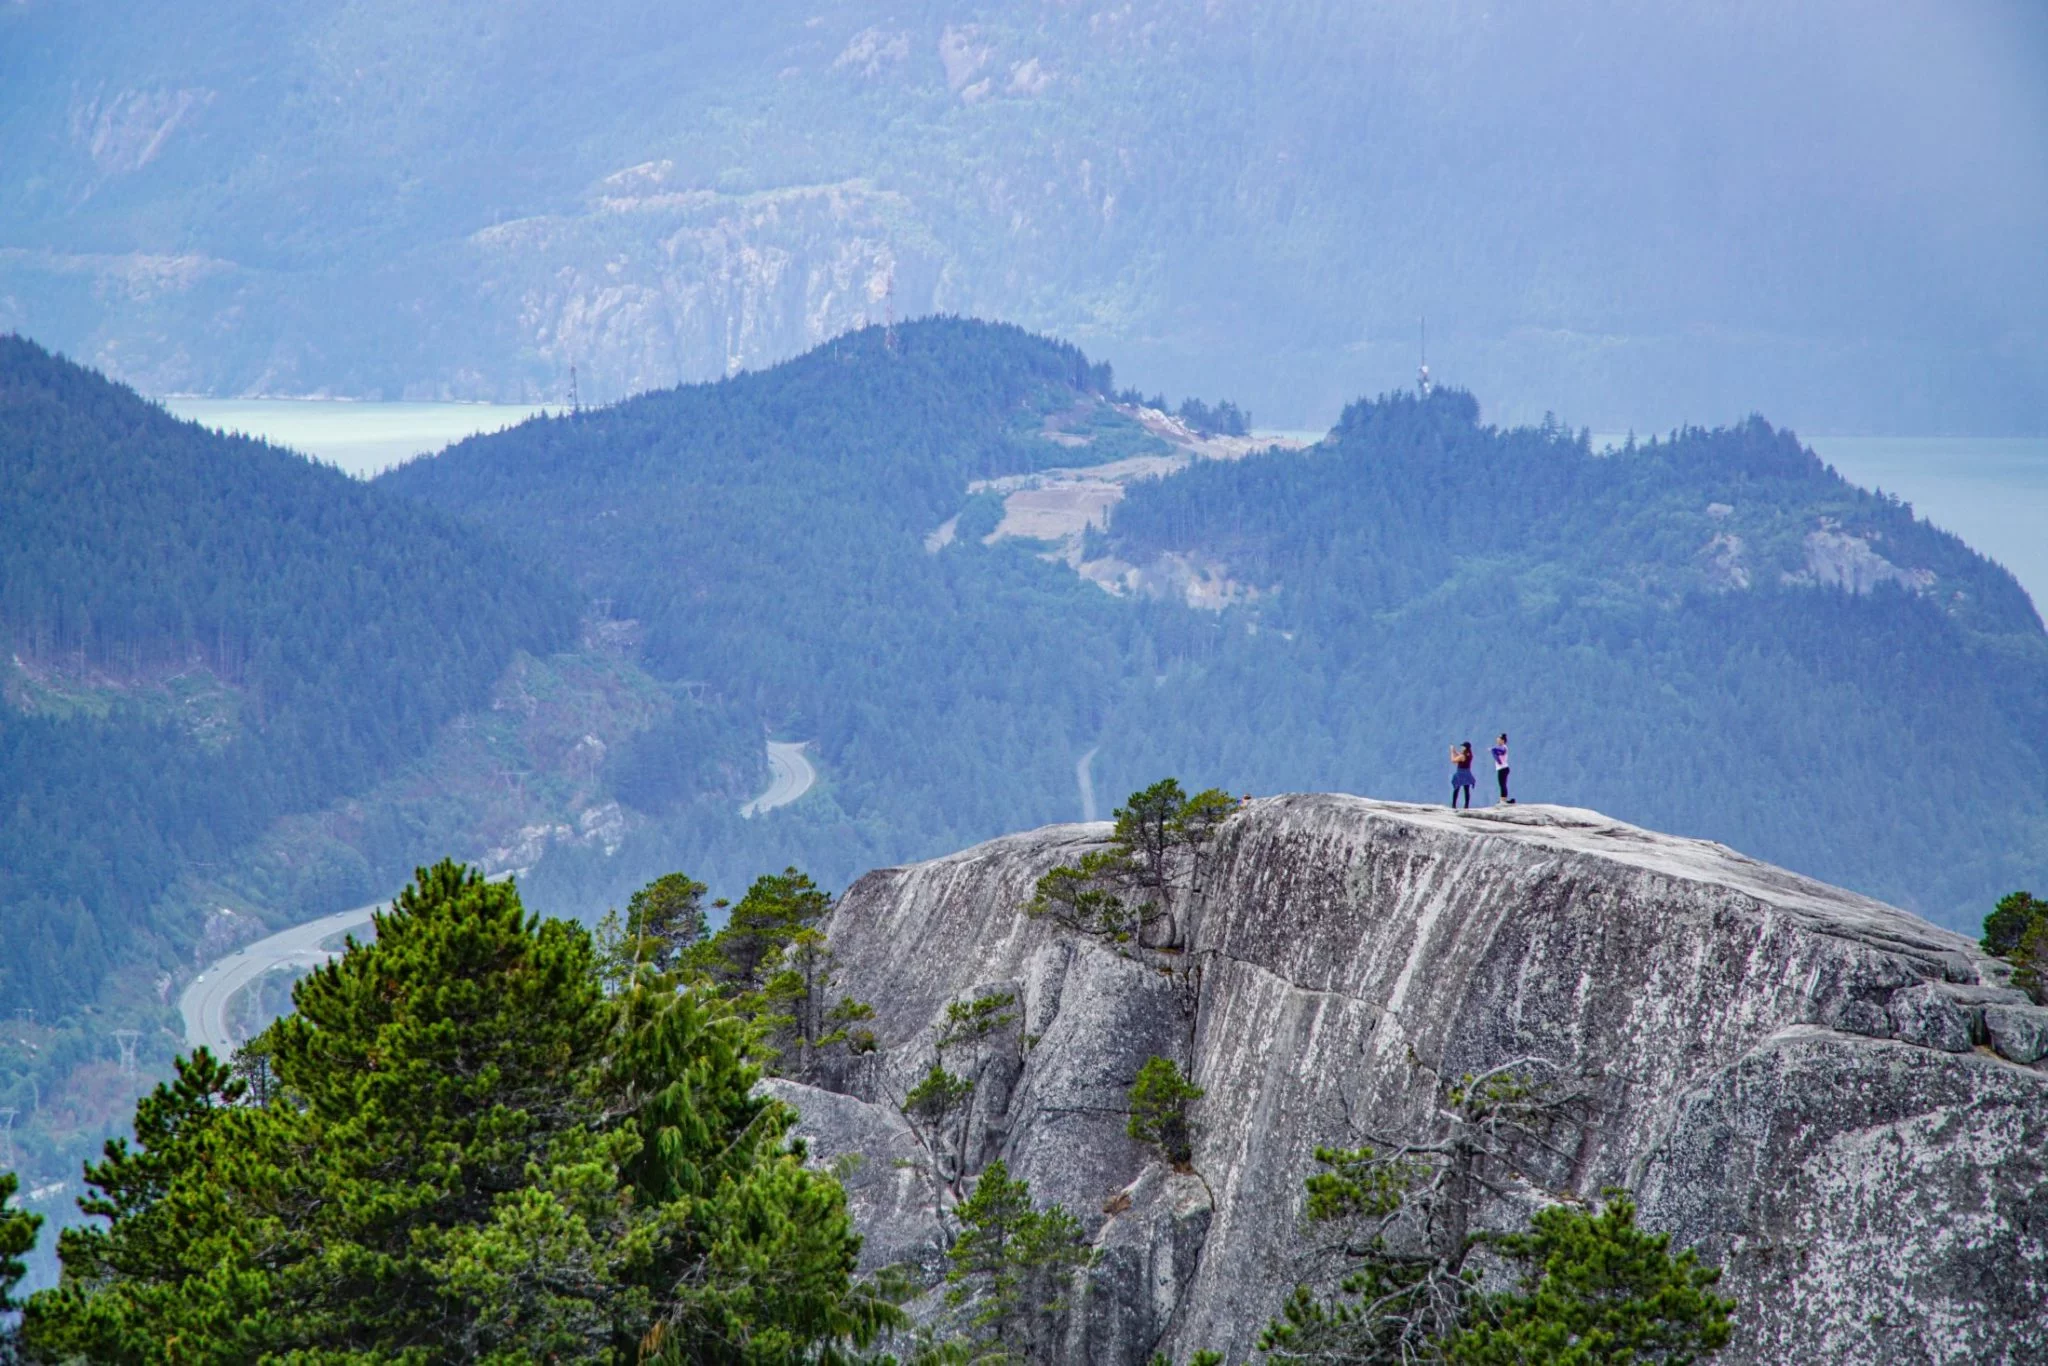 The Chief overlooking Squamish